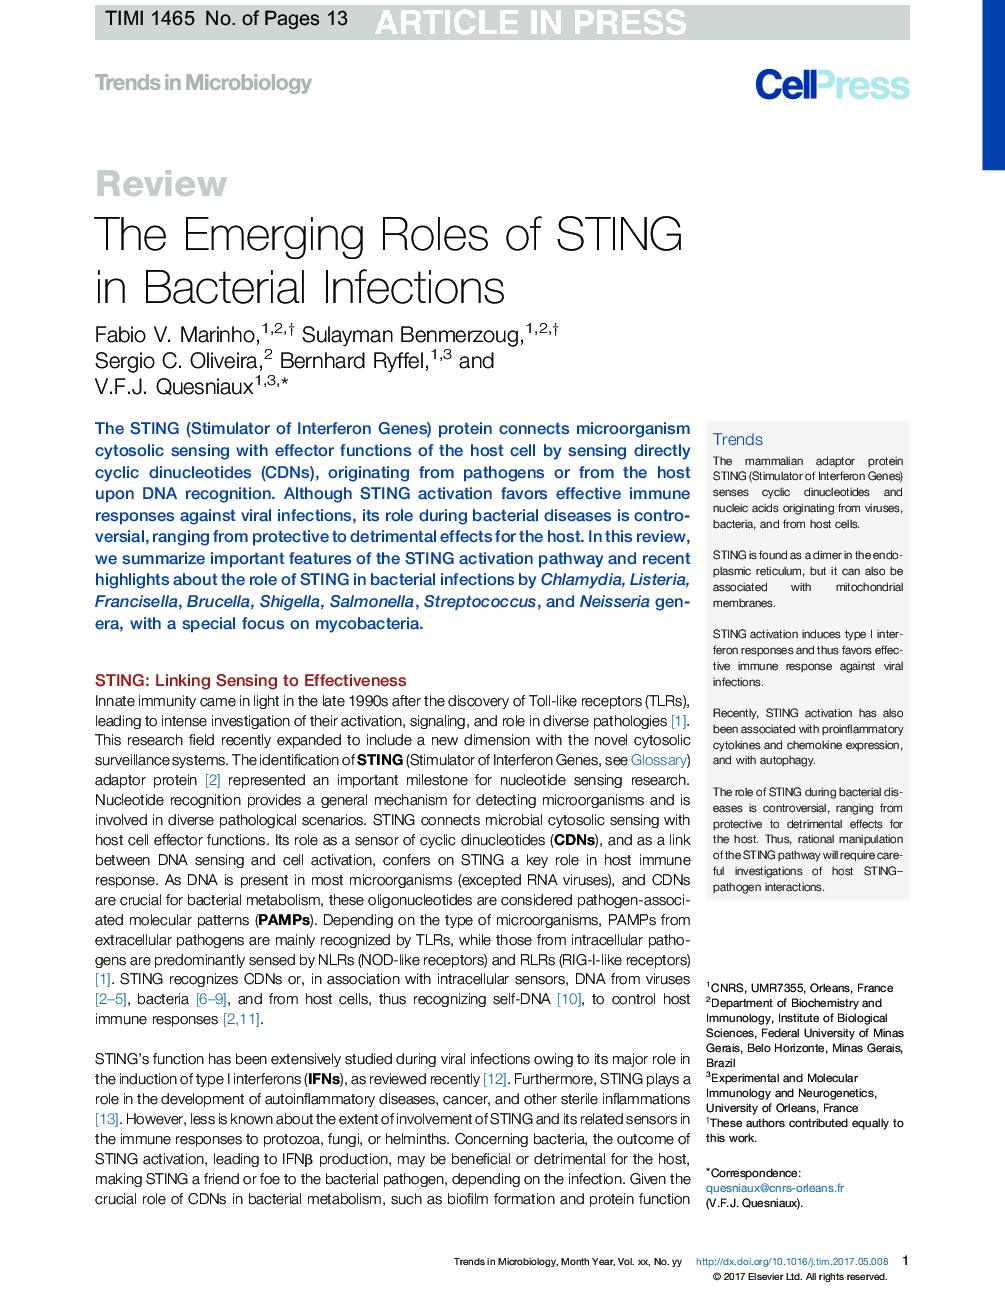 The Emerging Roles of STING in Bacterial Infections